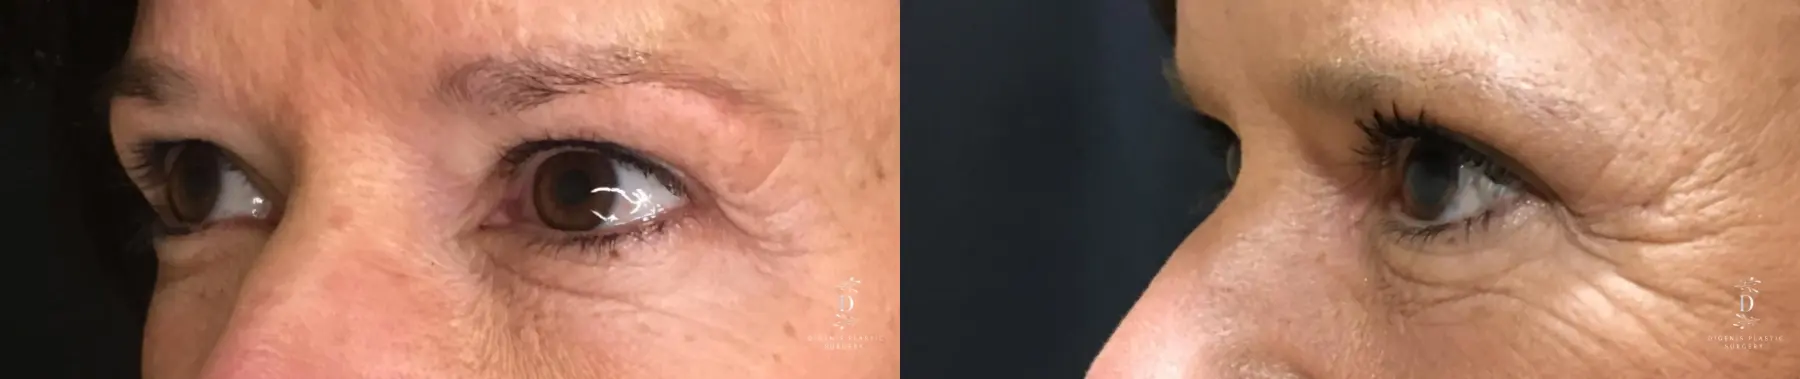 Eyelid Surgery: Patient 27 - Before and After 4